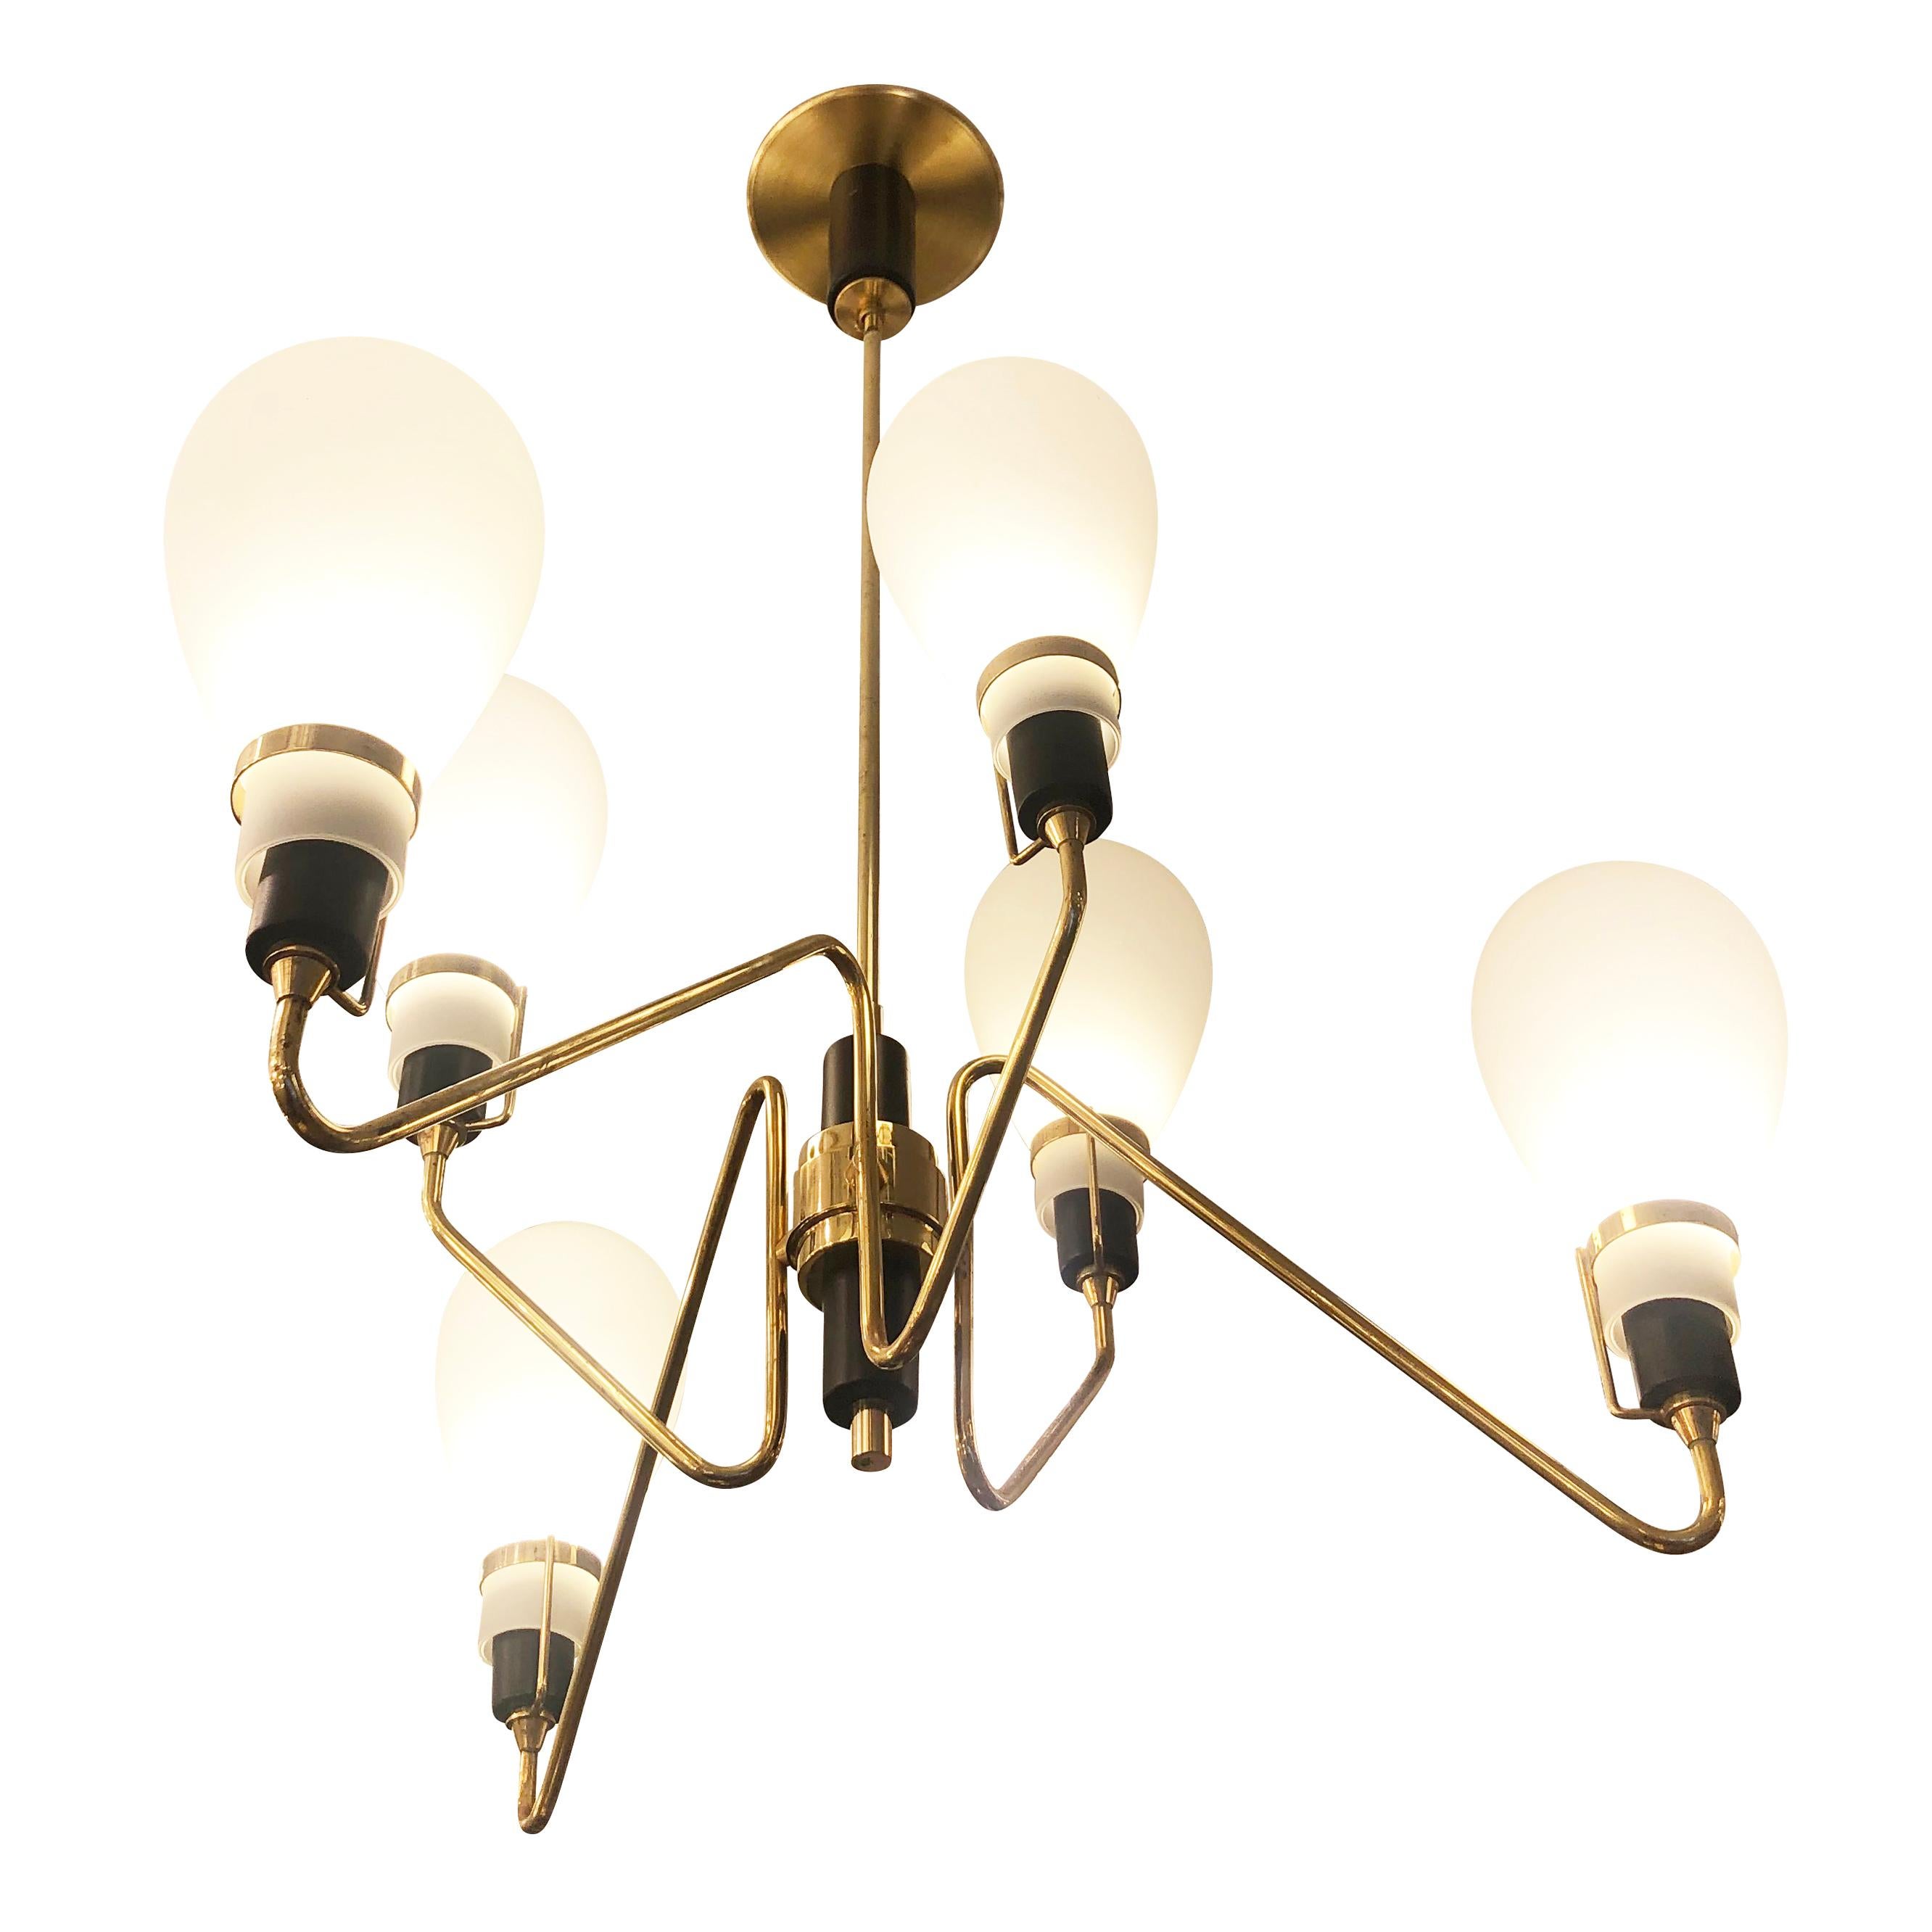 Italian midcentury chandelier with six staggered frosted glass shades on a brass and black lacquered frame. Holds six candelabra sockets. Height of stem can be adjusted as needed.

Condition: Excellent vintage condition, minor wear consistent with